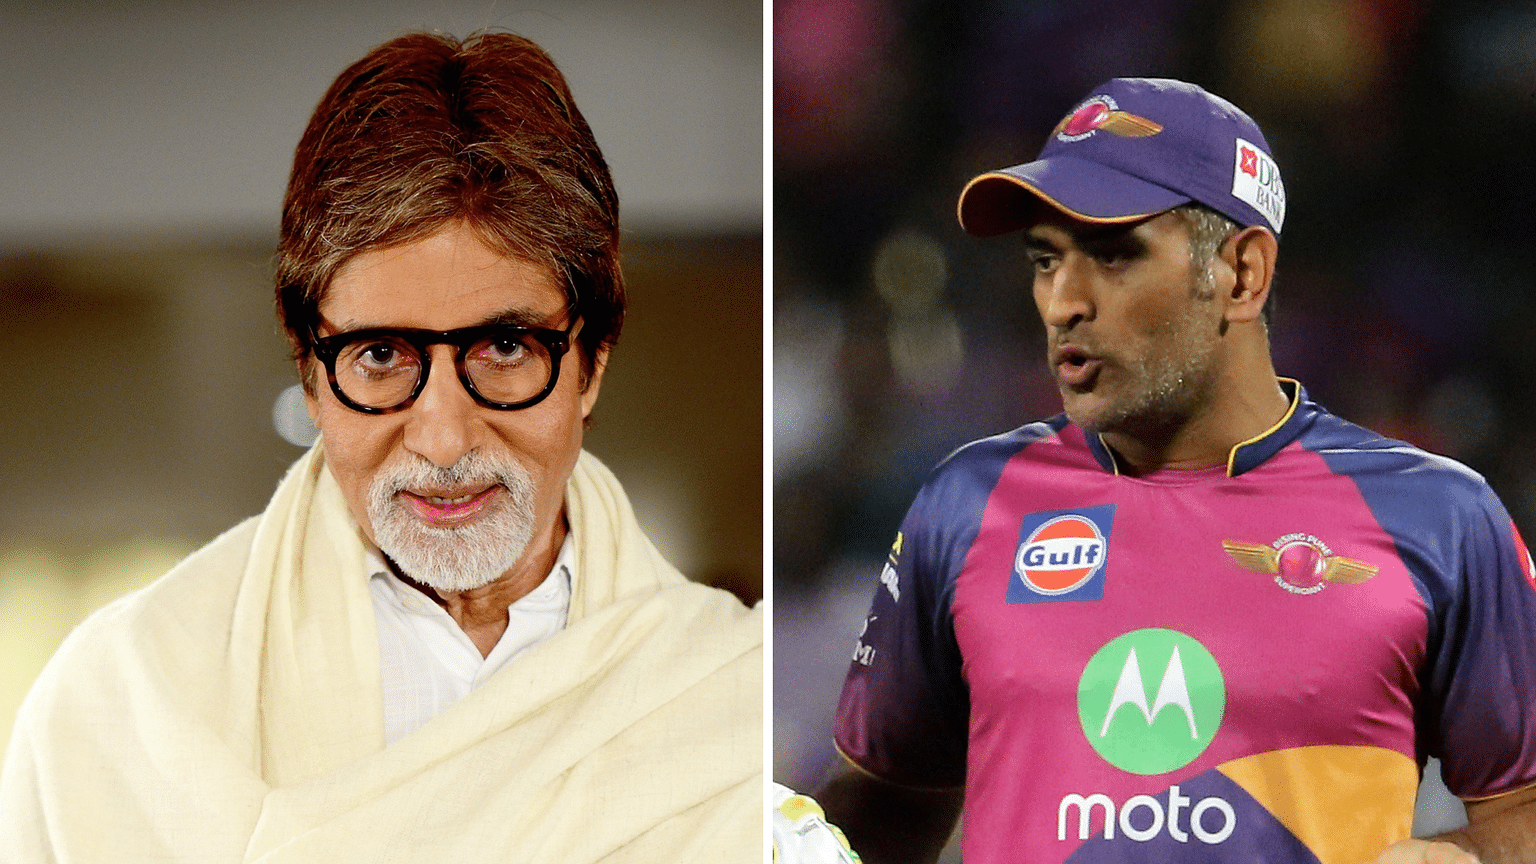 Amitabh Bachchan spoke about his encounter with MS Dhoni. (Photo: IANS)